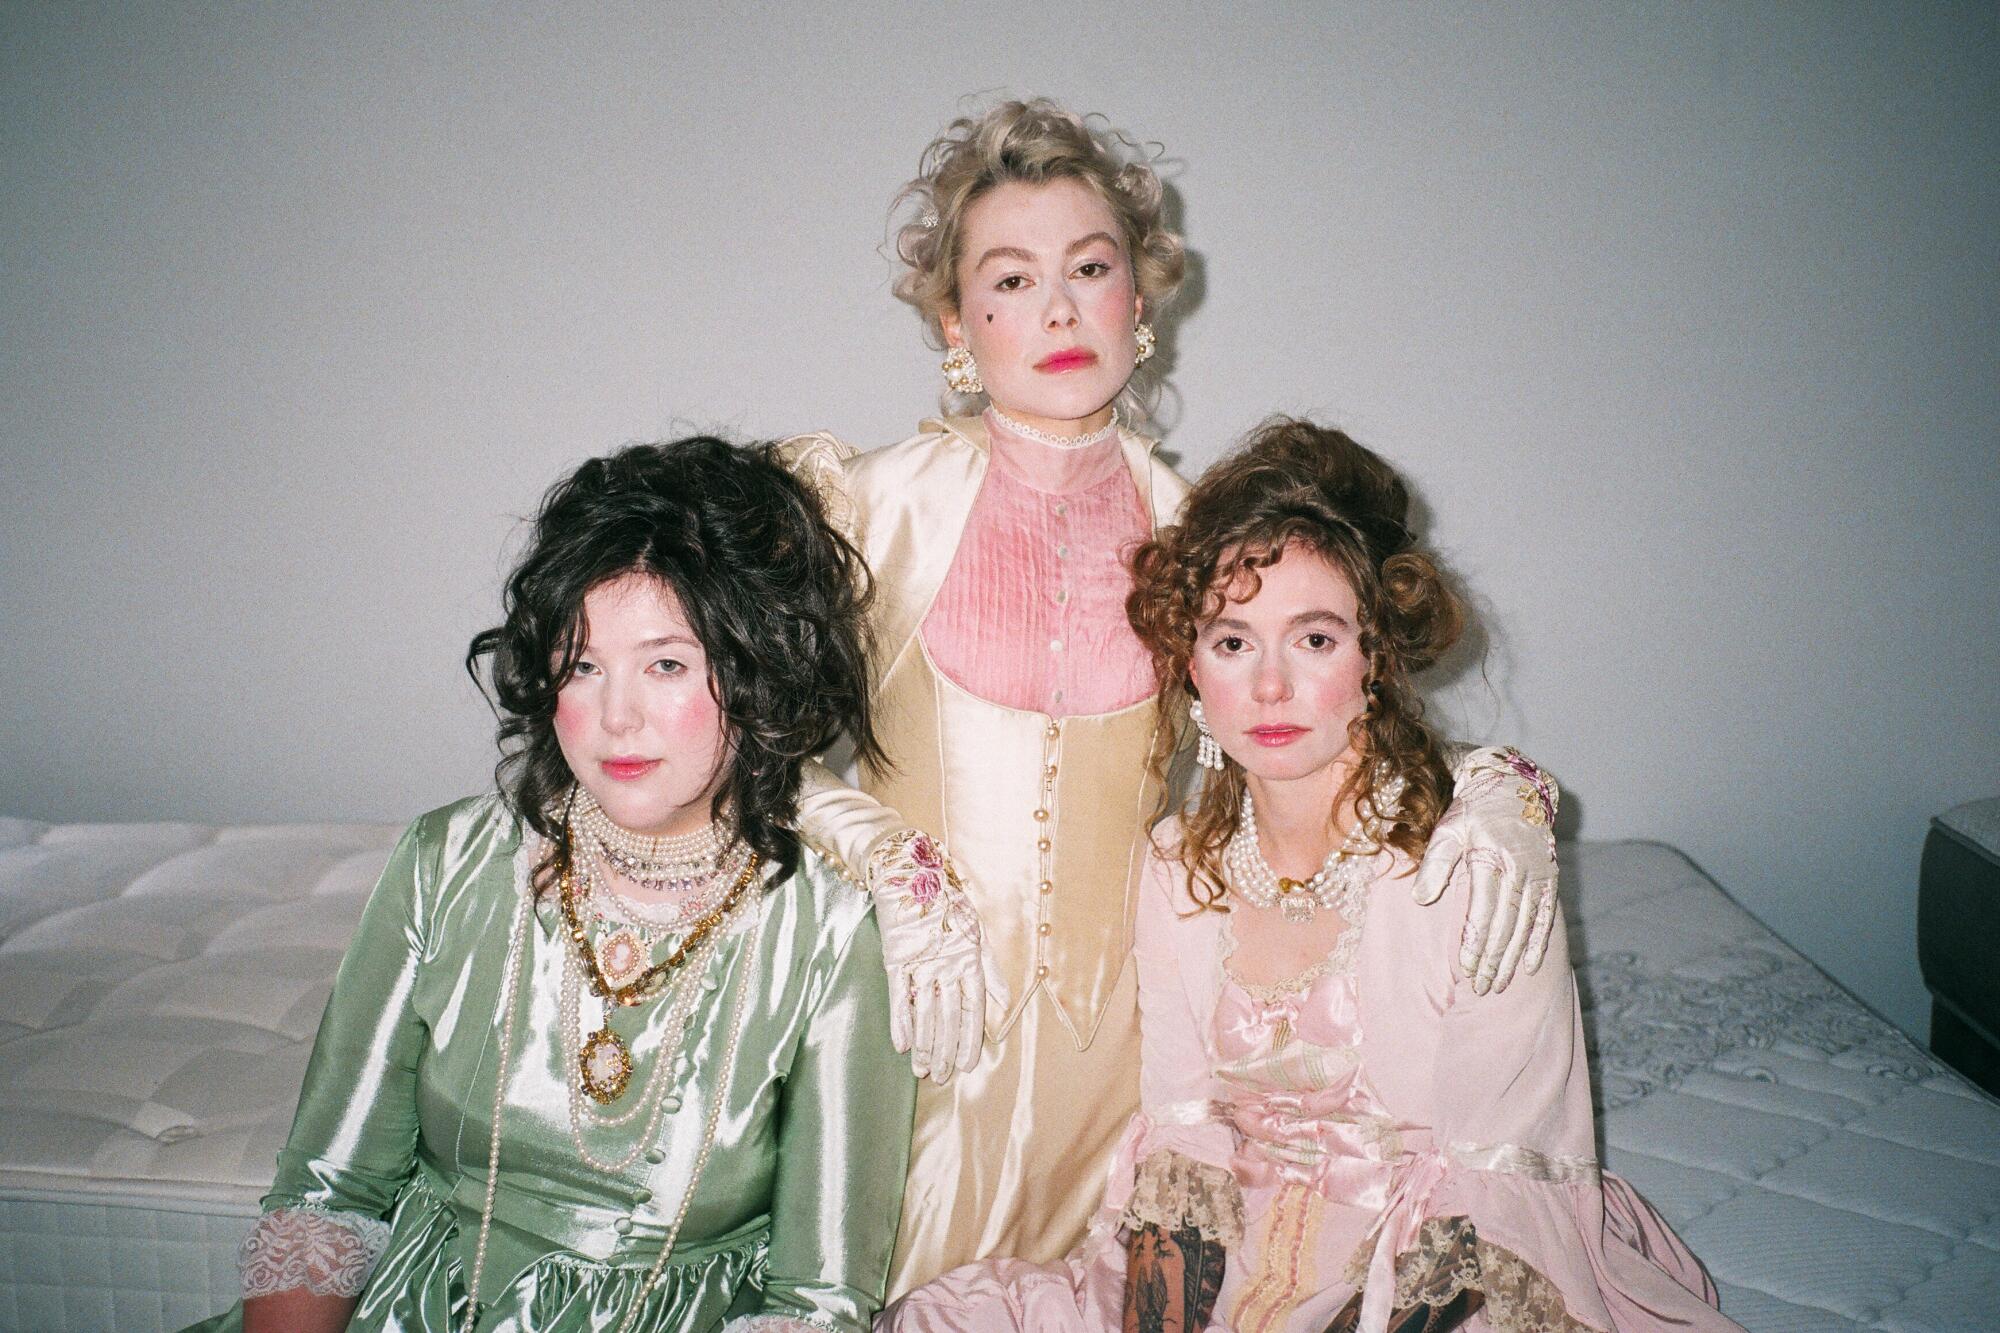 Three female rock musicians in Victorian dresses seated on a mattress